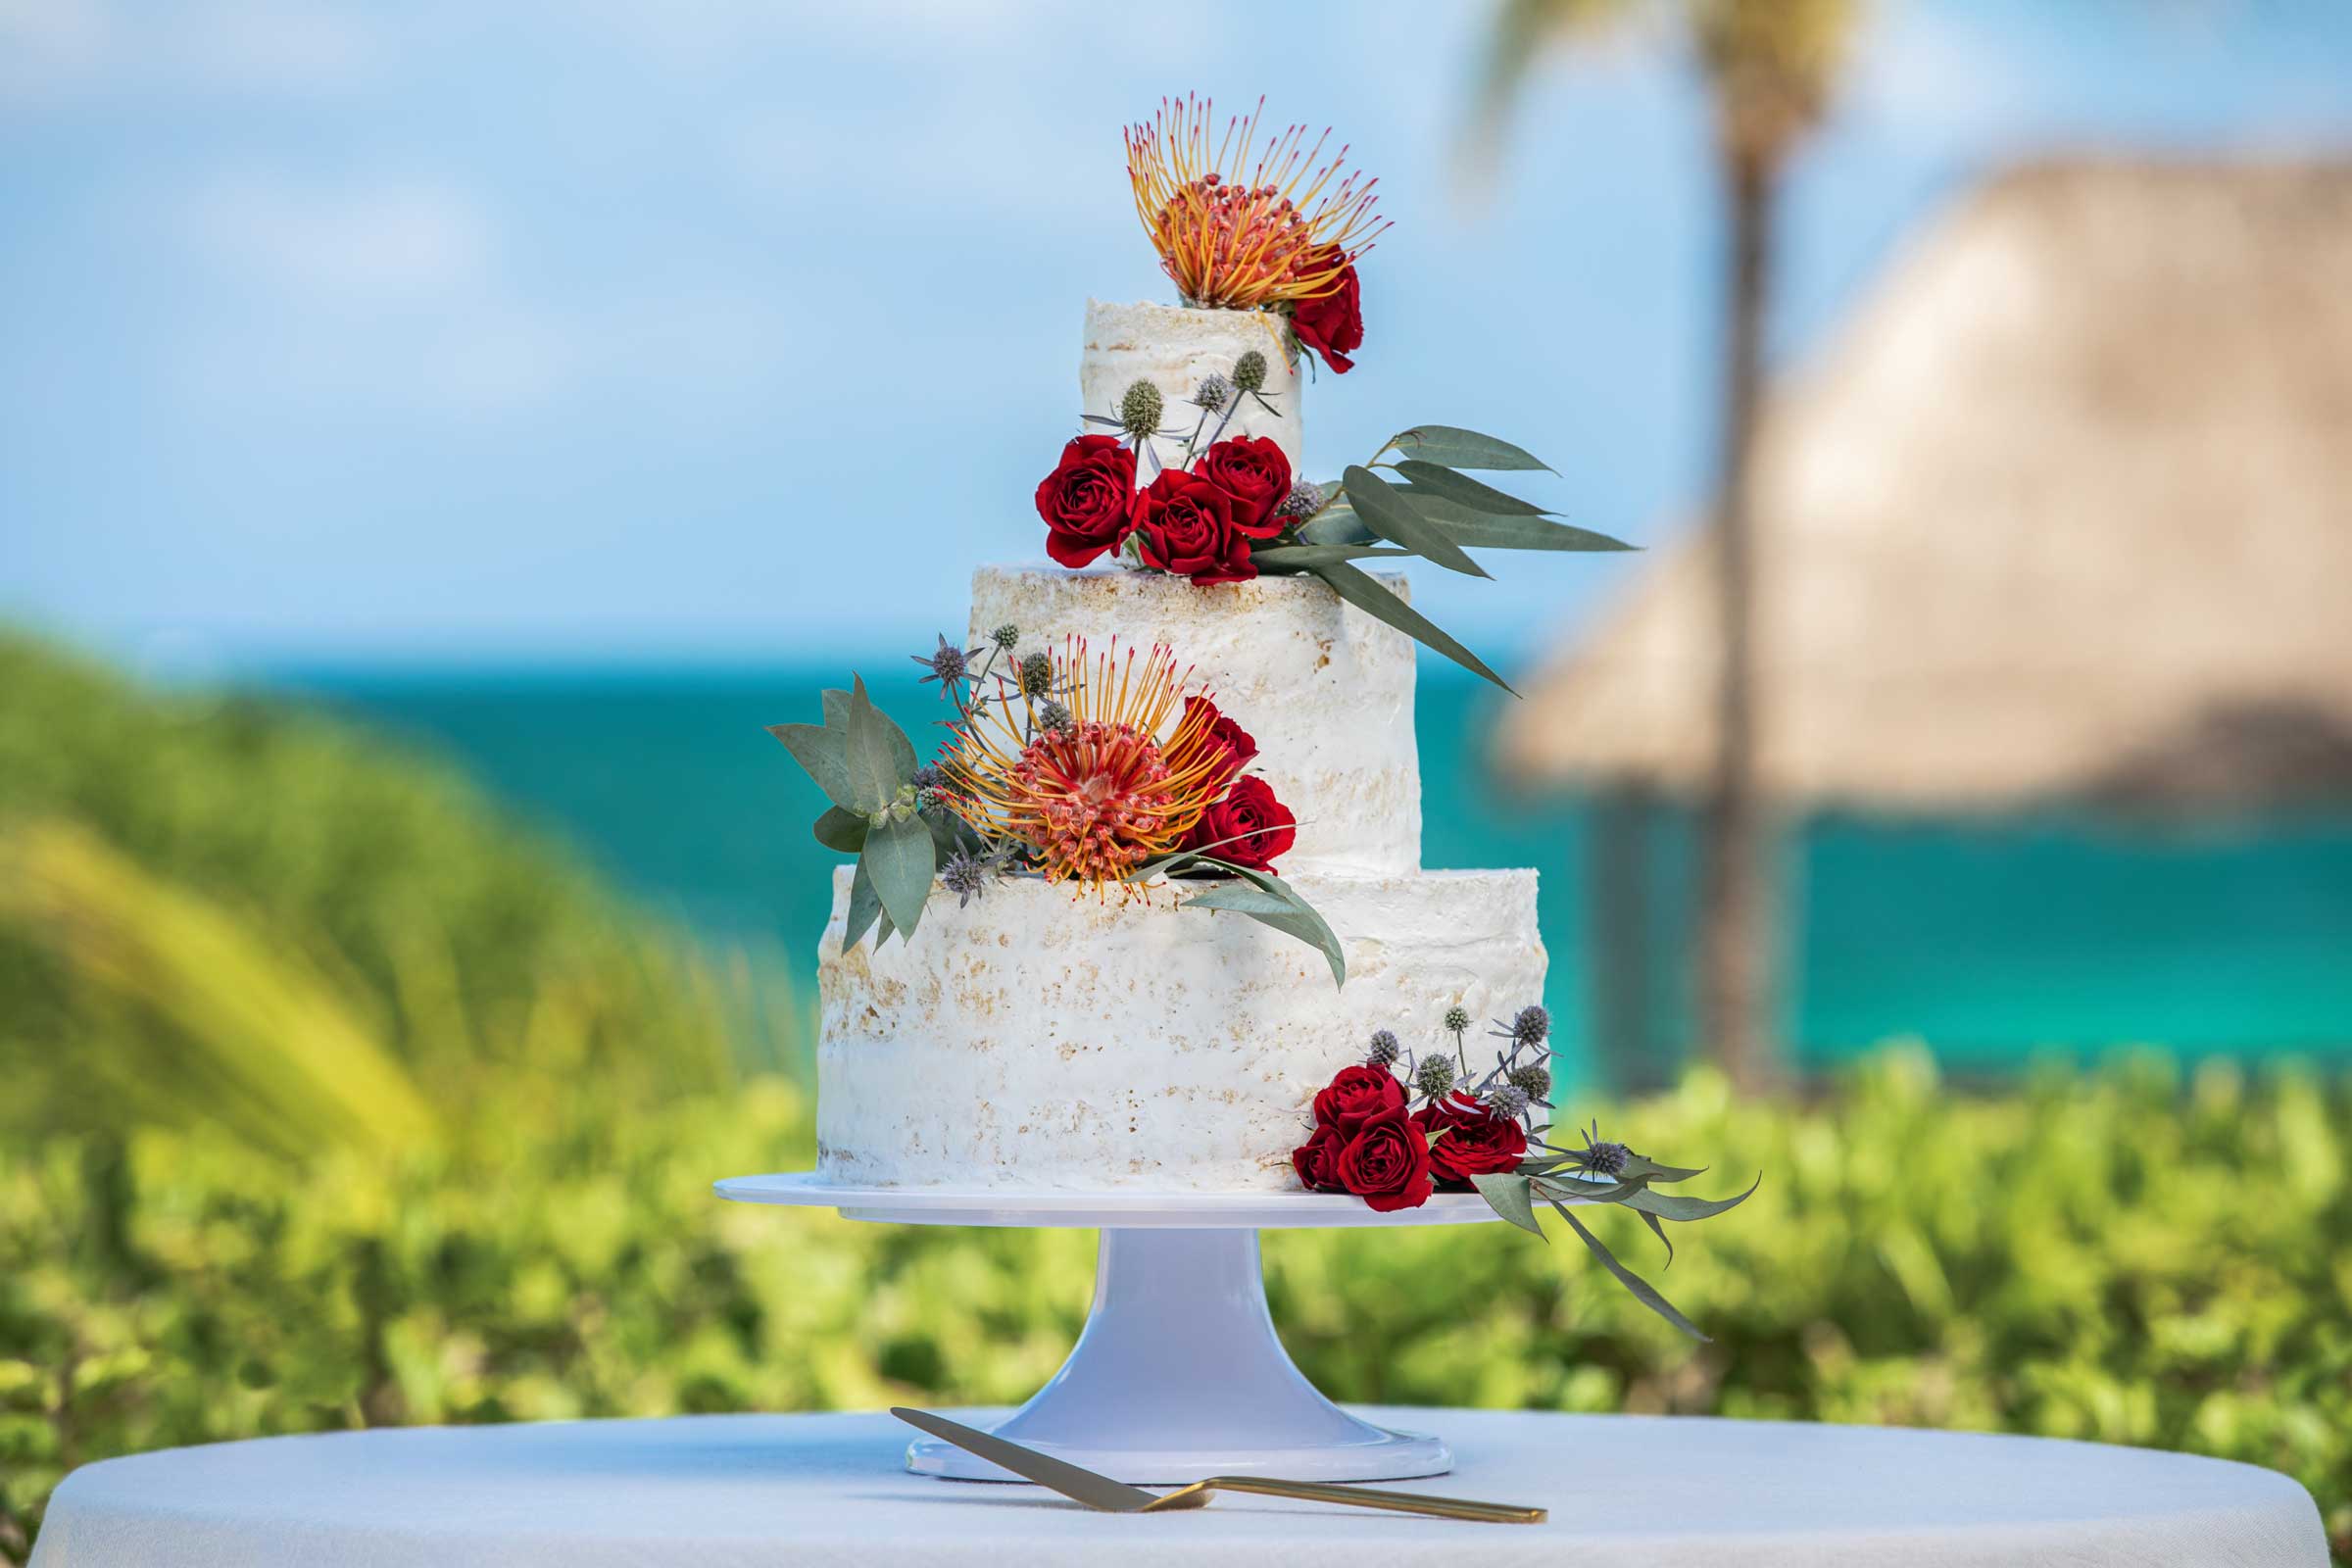 Excellence Riviera Cancun the Best Resort to Renew Your Wedding Vows